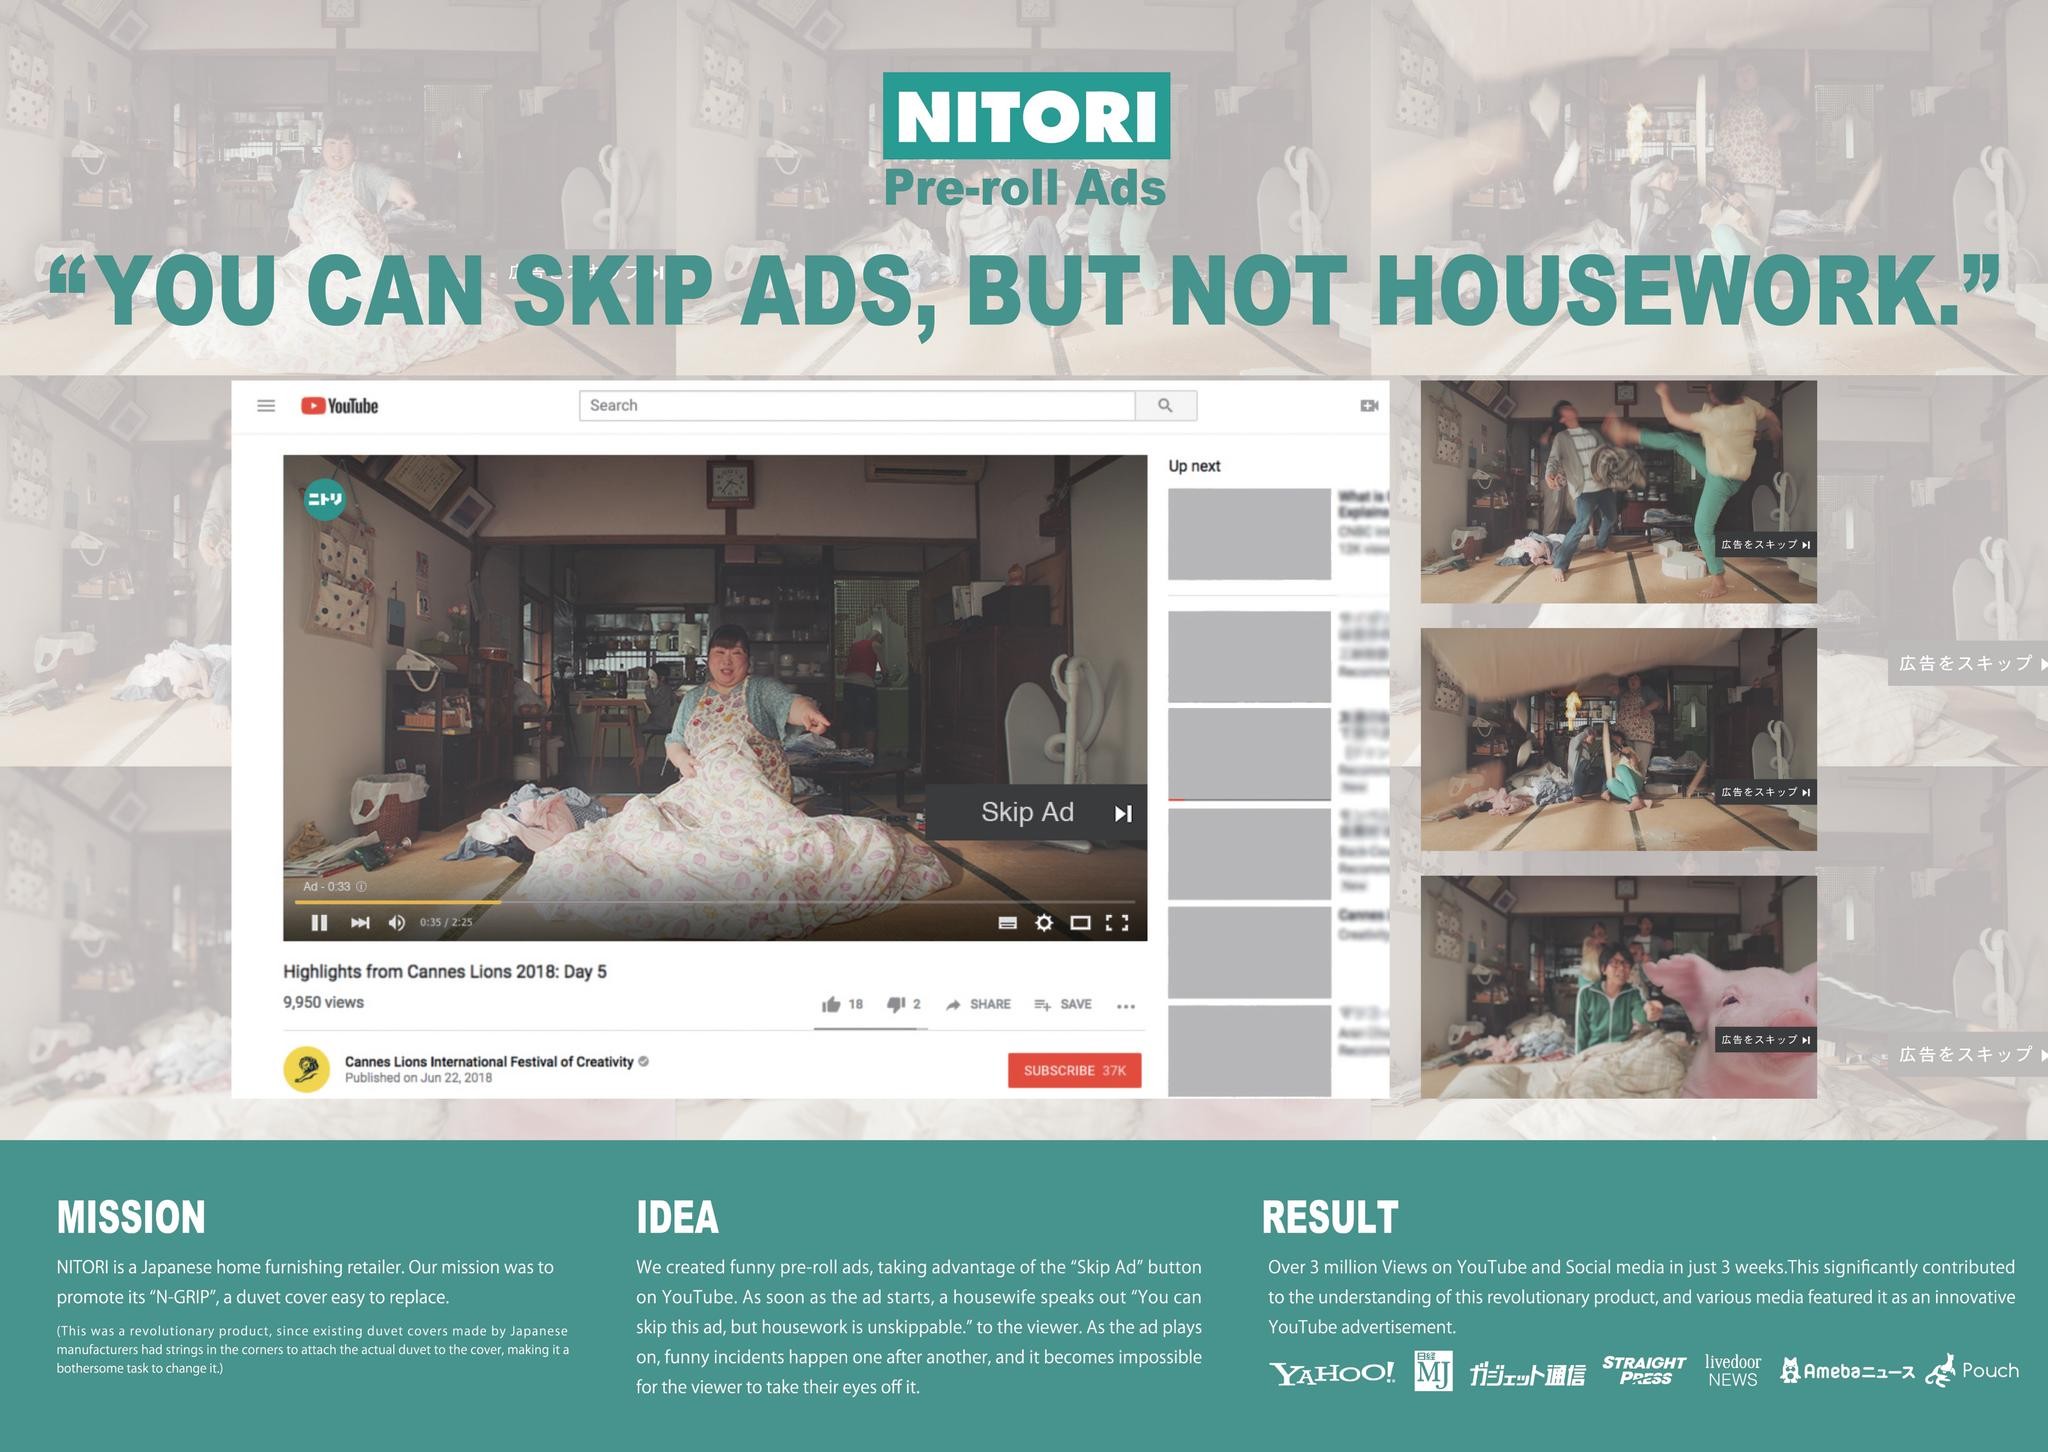 YOU CAN SKIP ADS, BUT NOT HOUSEWORK.